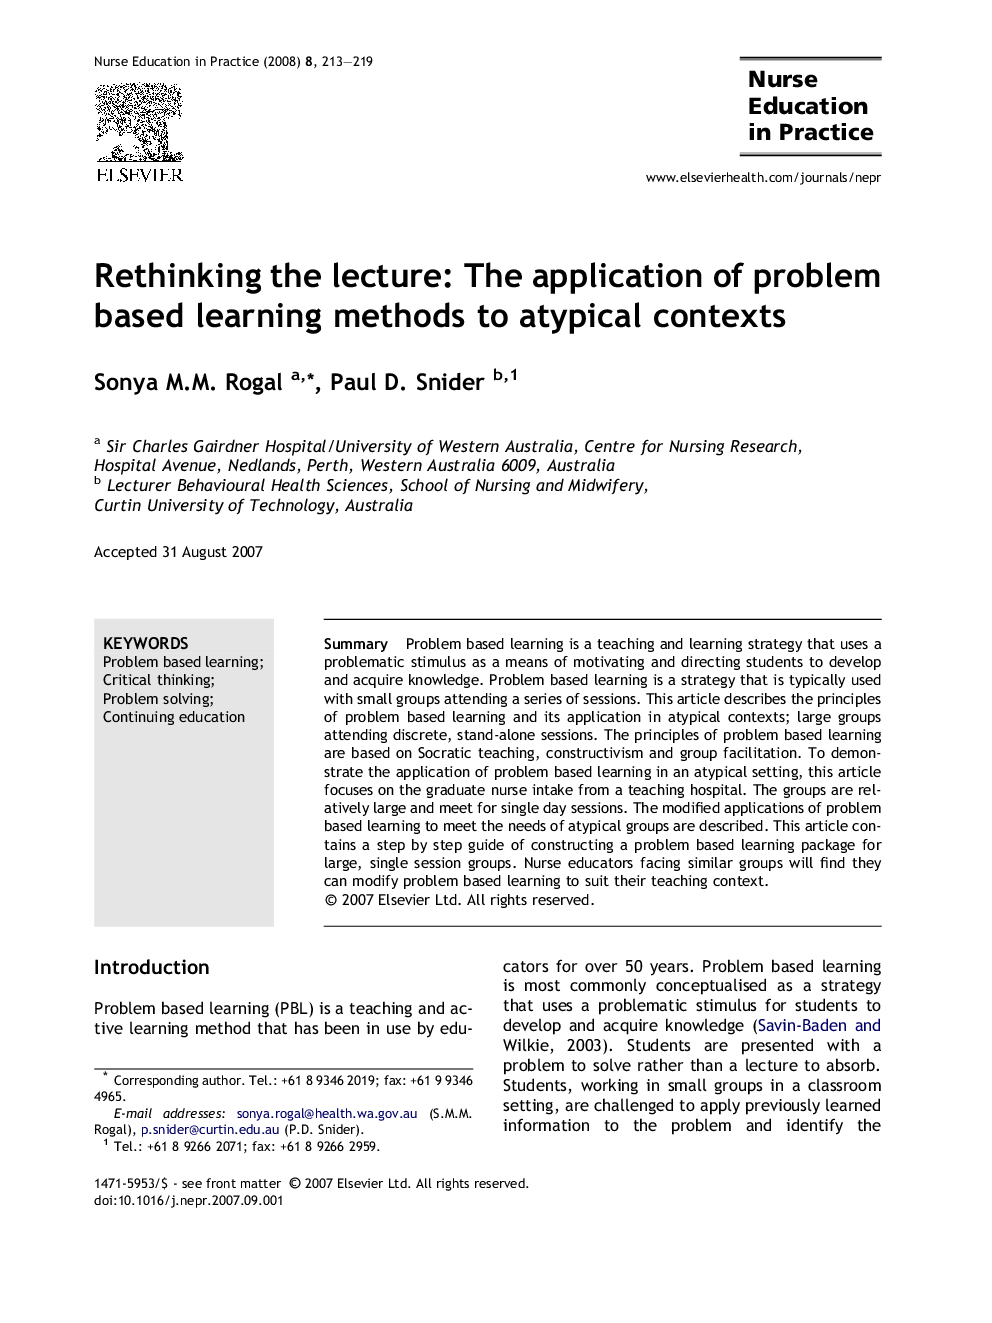 Rethinking the lecture: The application of problem based learning methods to atypical contexts